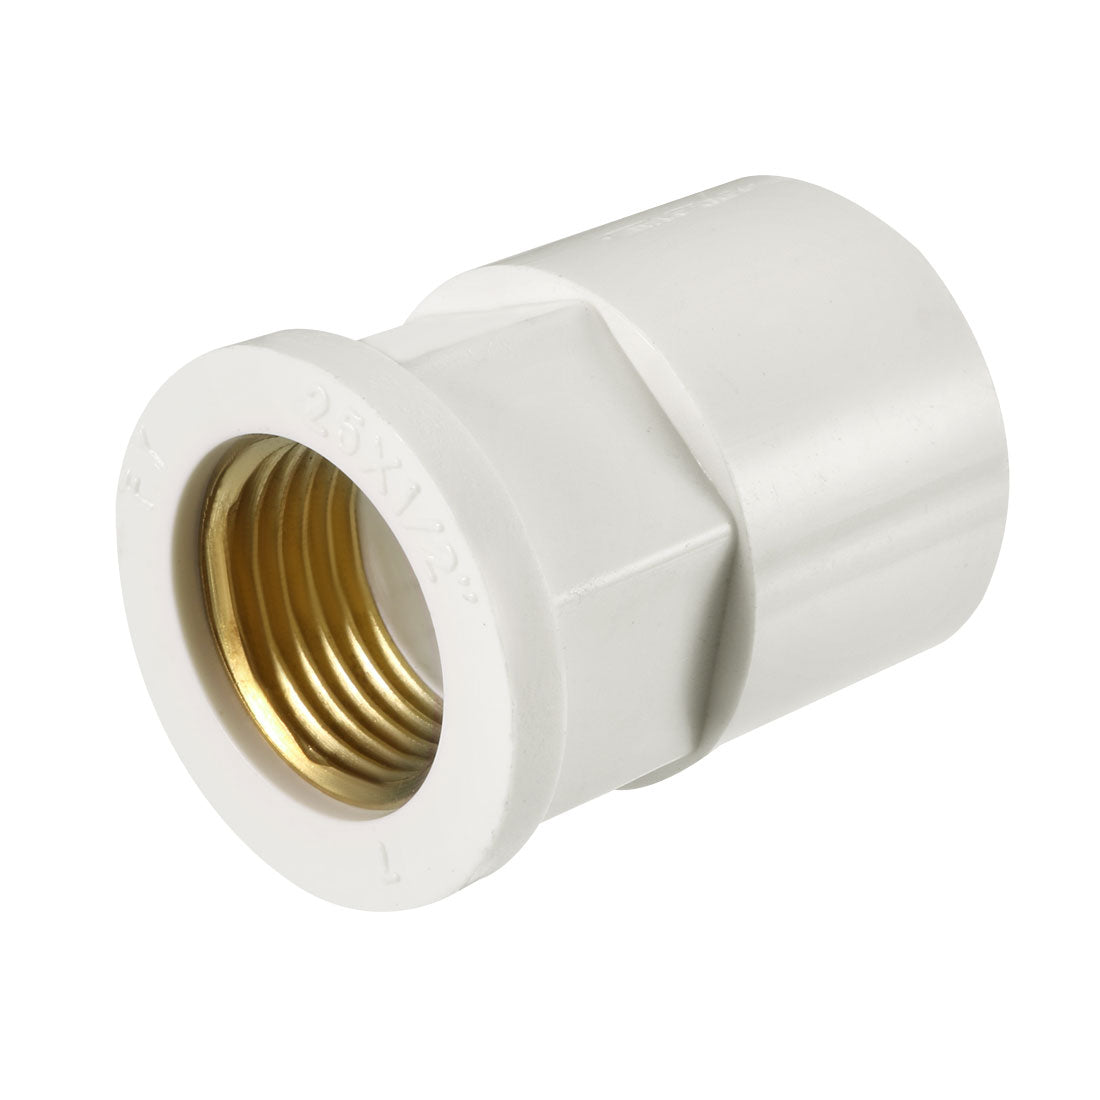 uxcell Uxcell 25mm Slip x 1/2 PT Female Brass Thread PVC Pipe Fitting Adapter 2 Pcs